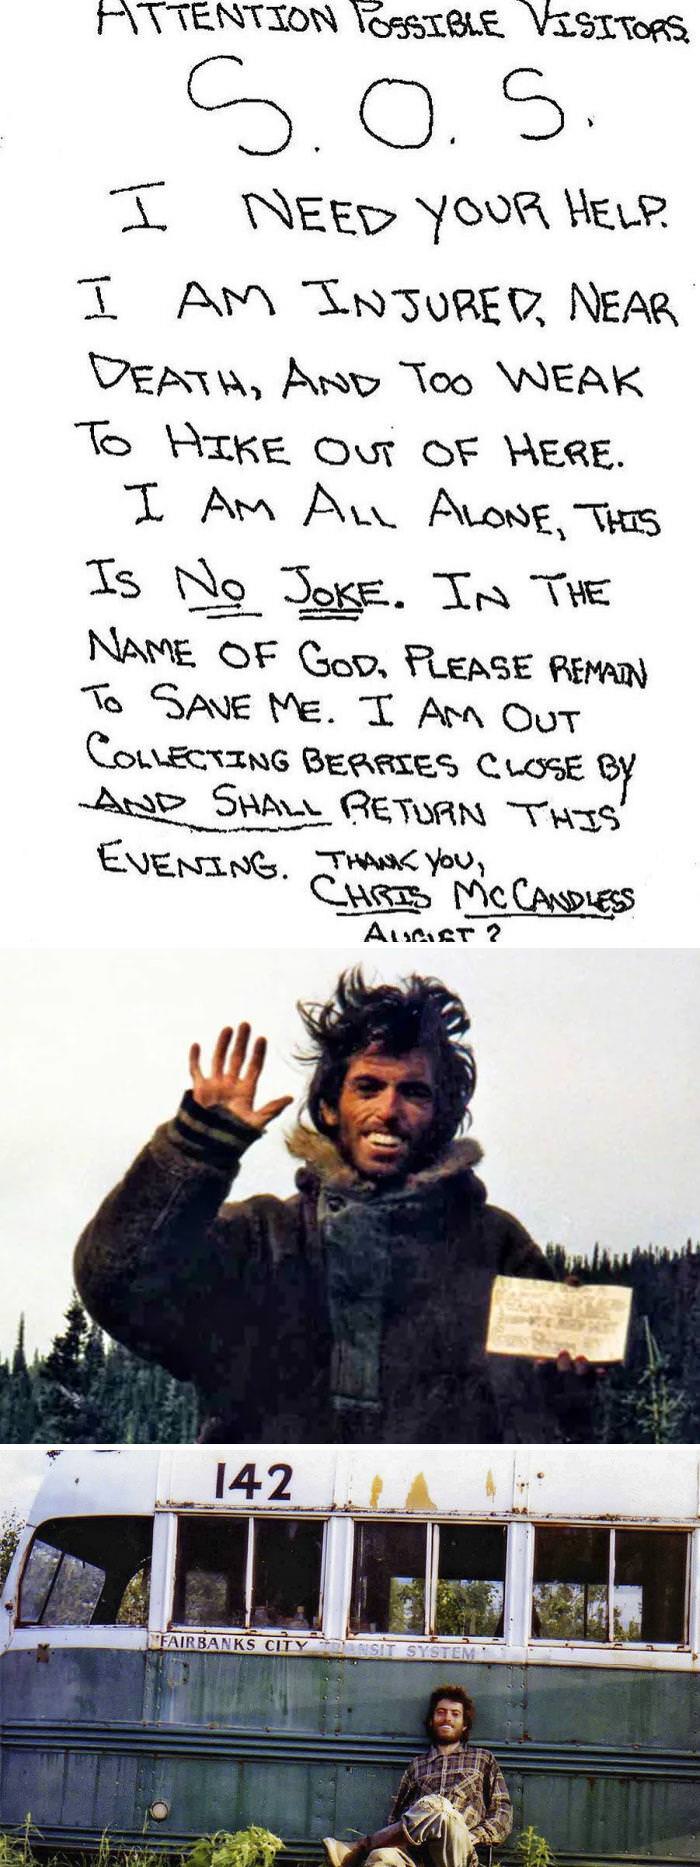 Chris McCandless' note that was found in his truck in the middle of Alaska.